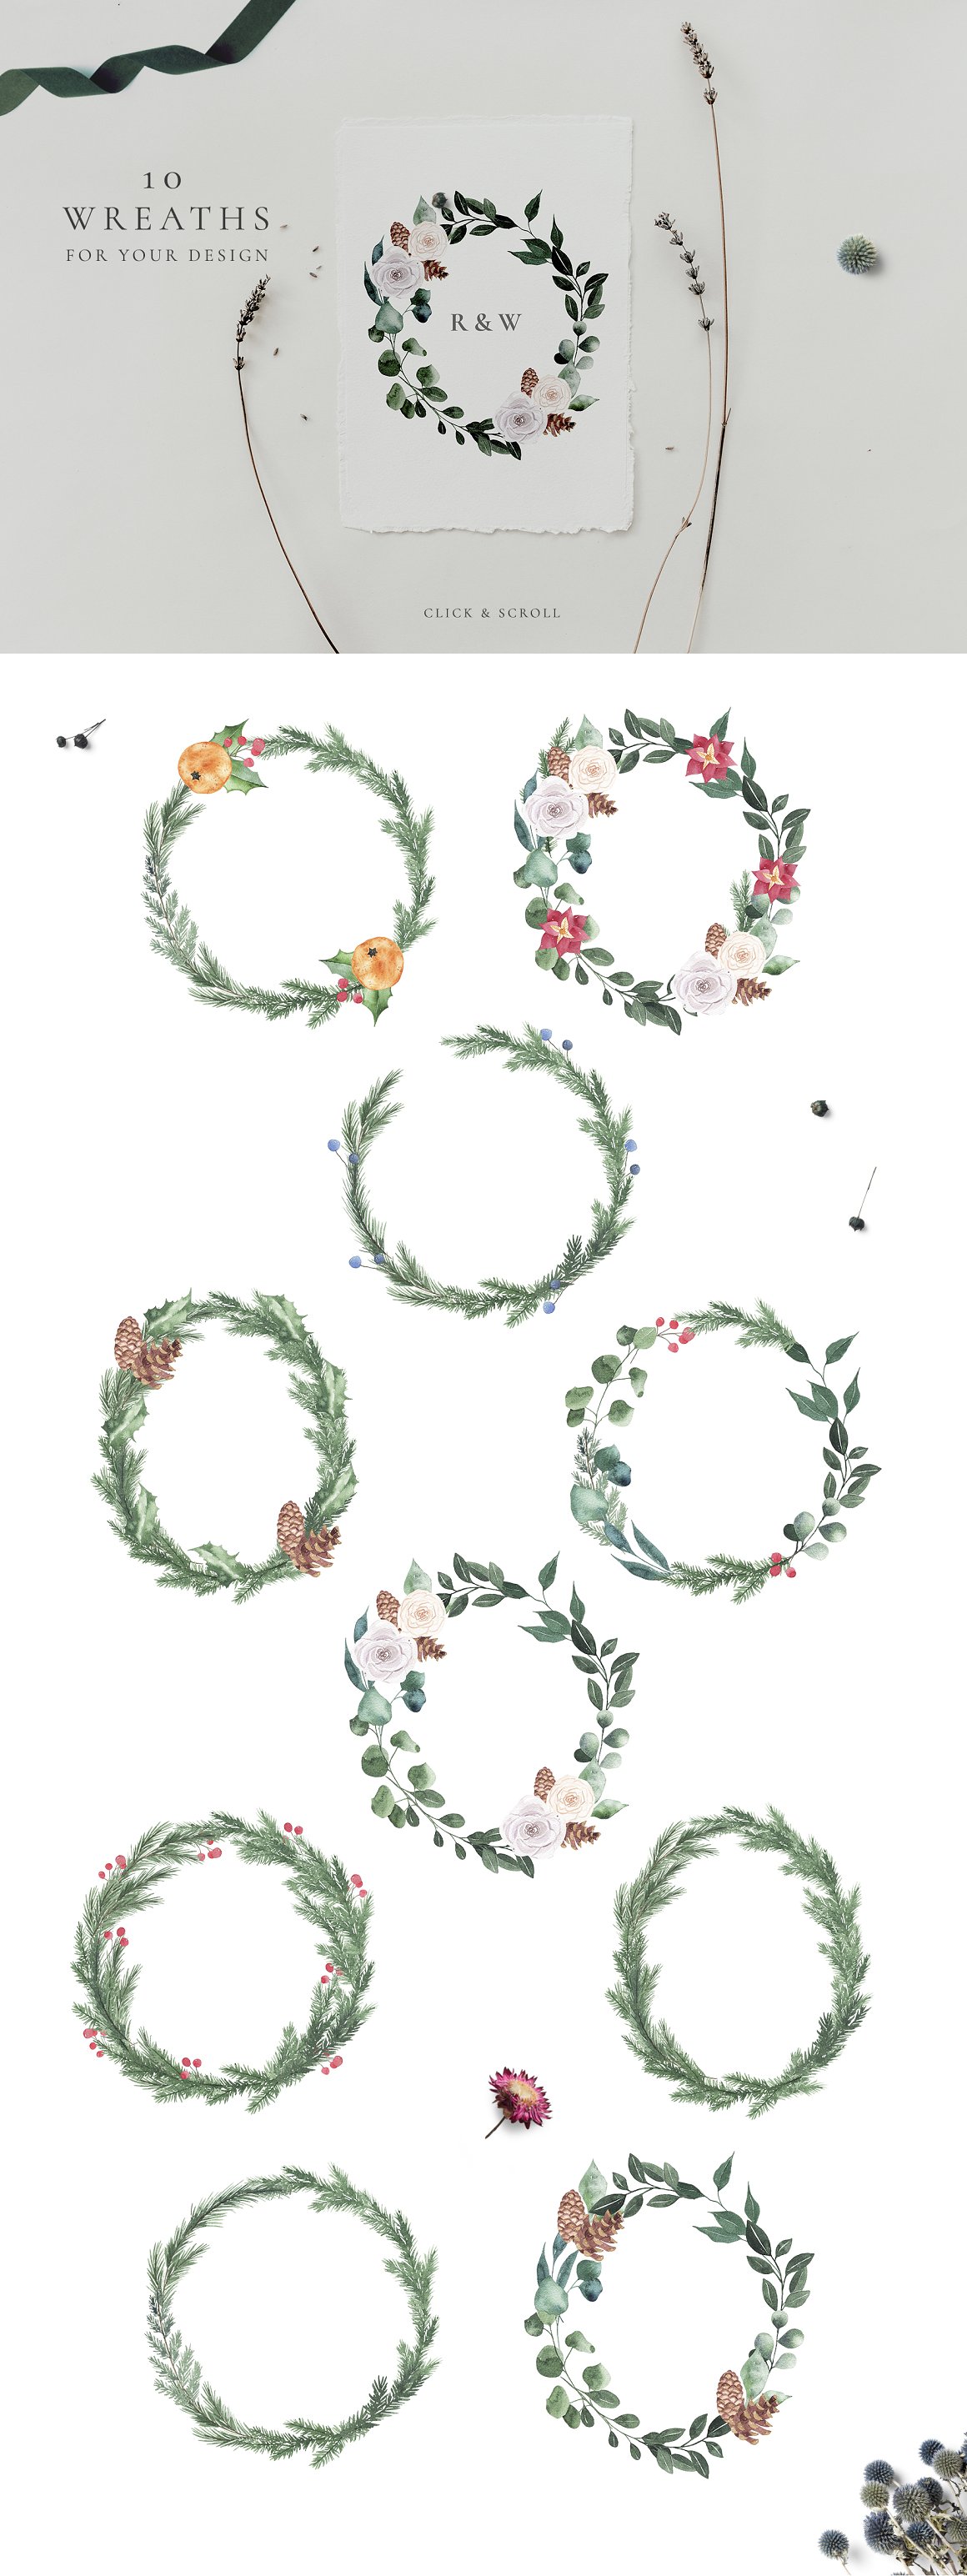 Kit of different christmas wreaths on a white background.